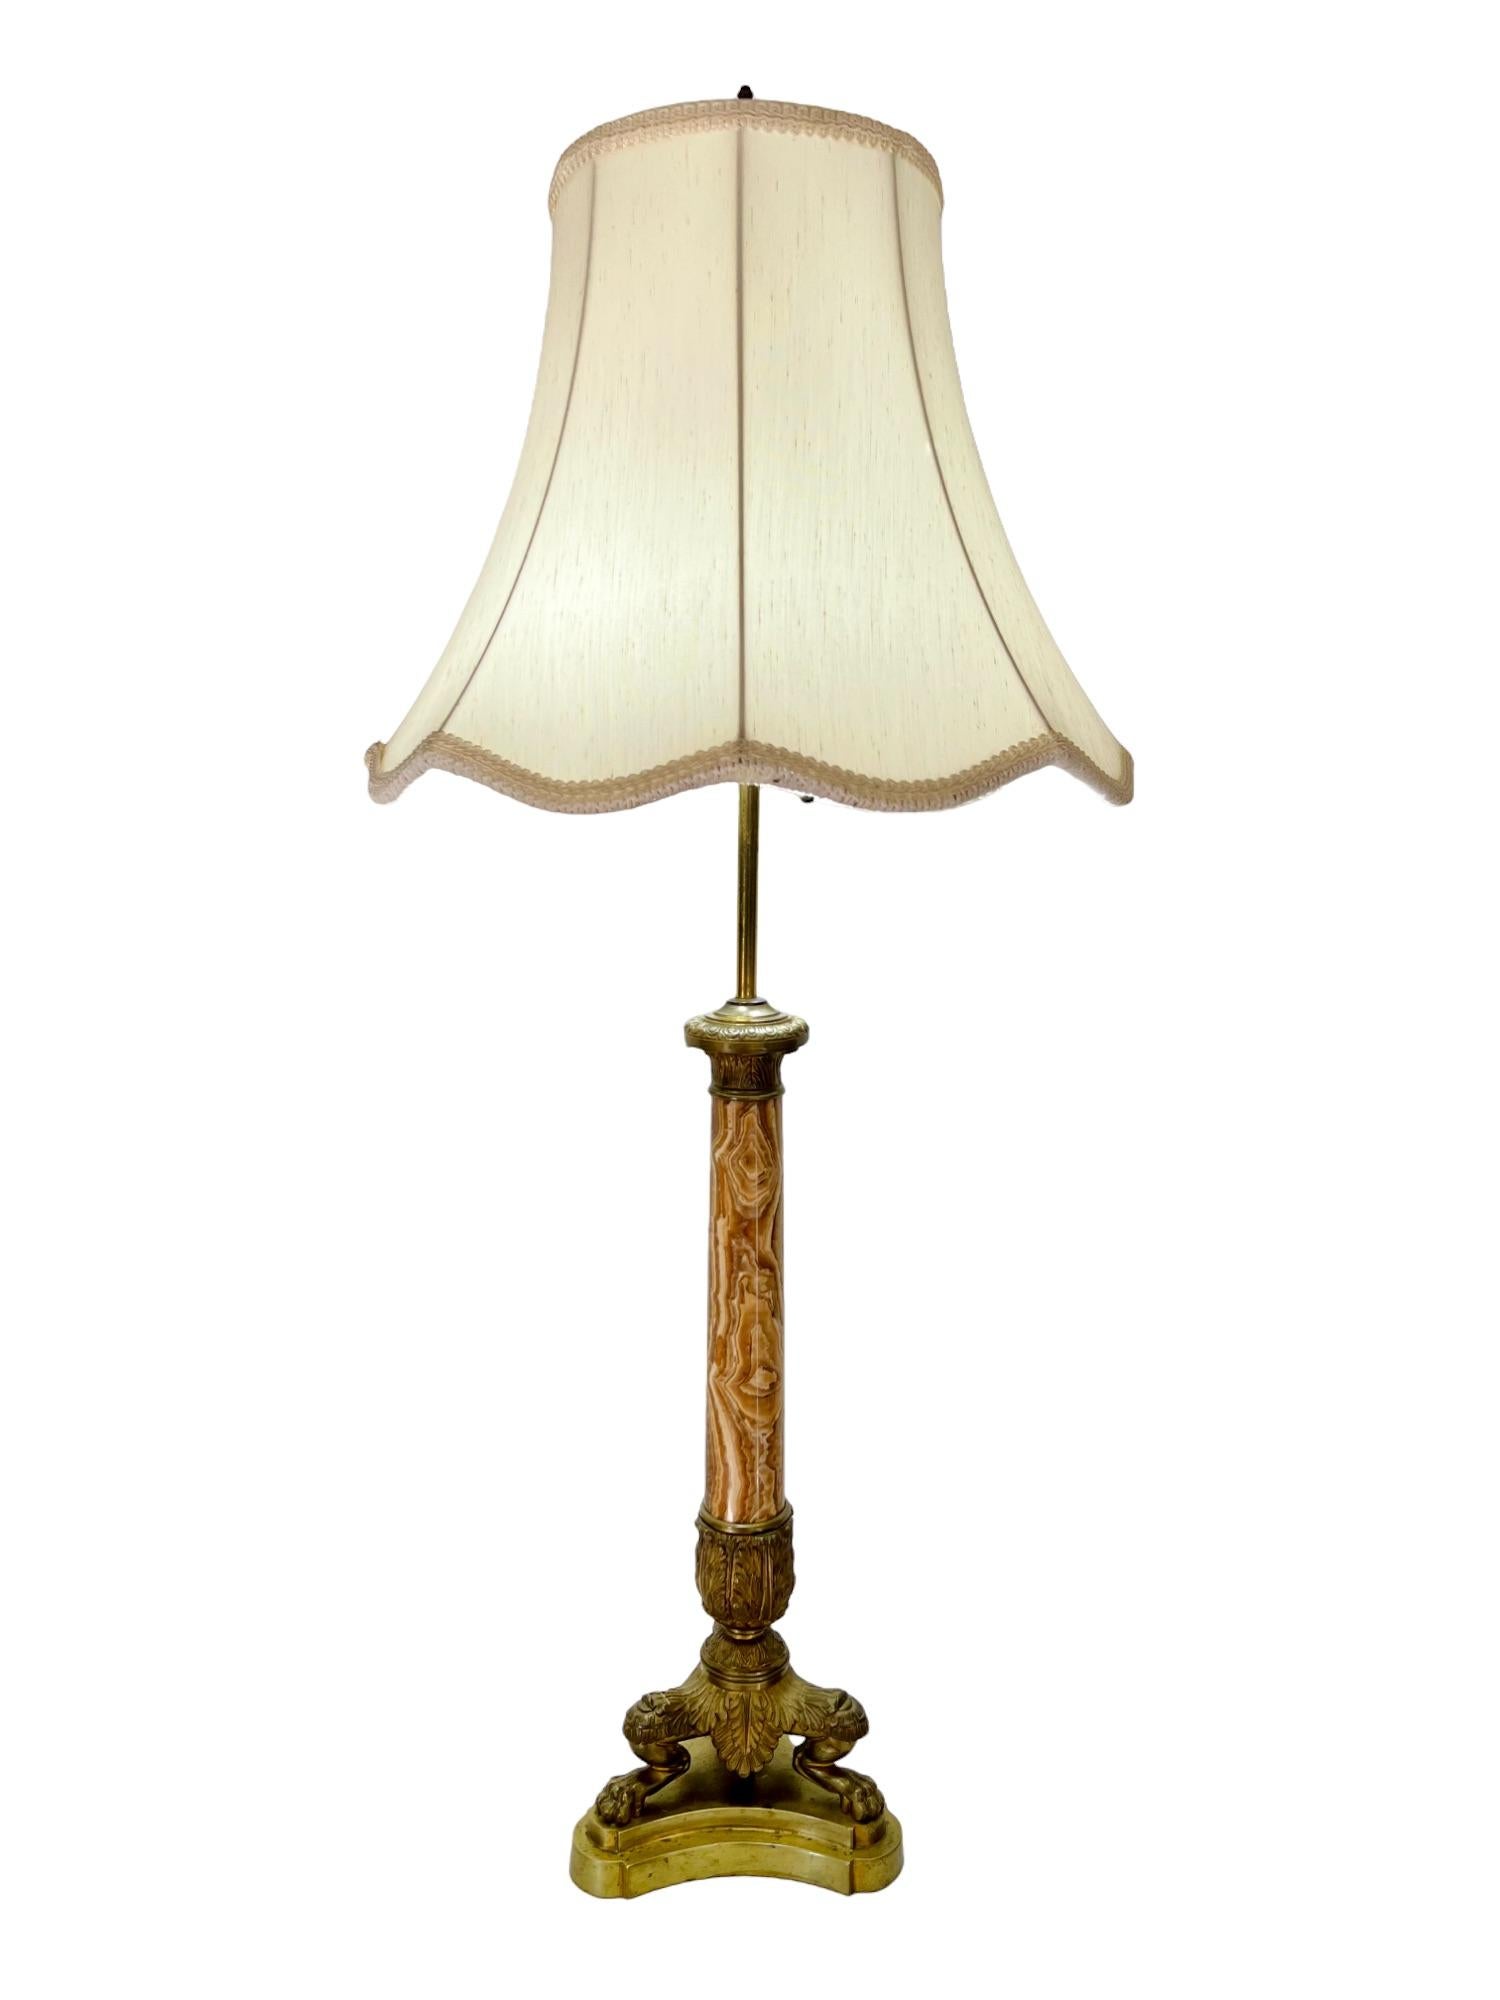 19th Century, French Empire Onyx & Brass Paw Footed Lamp In Good Condition For Sale In Harlingen, TX